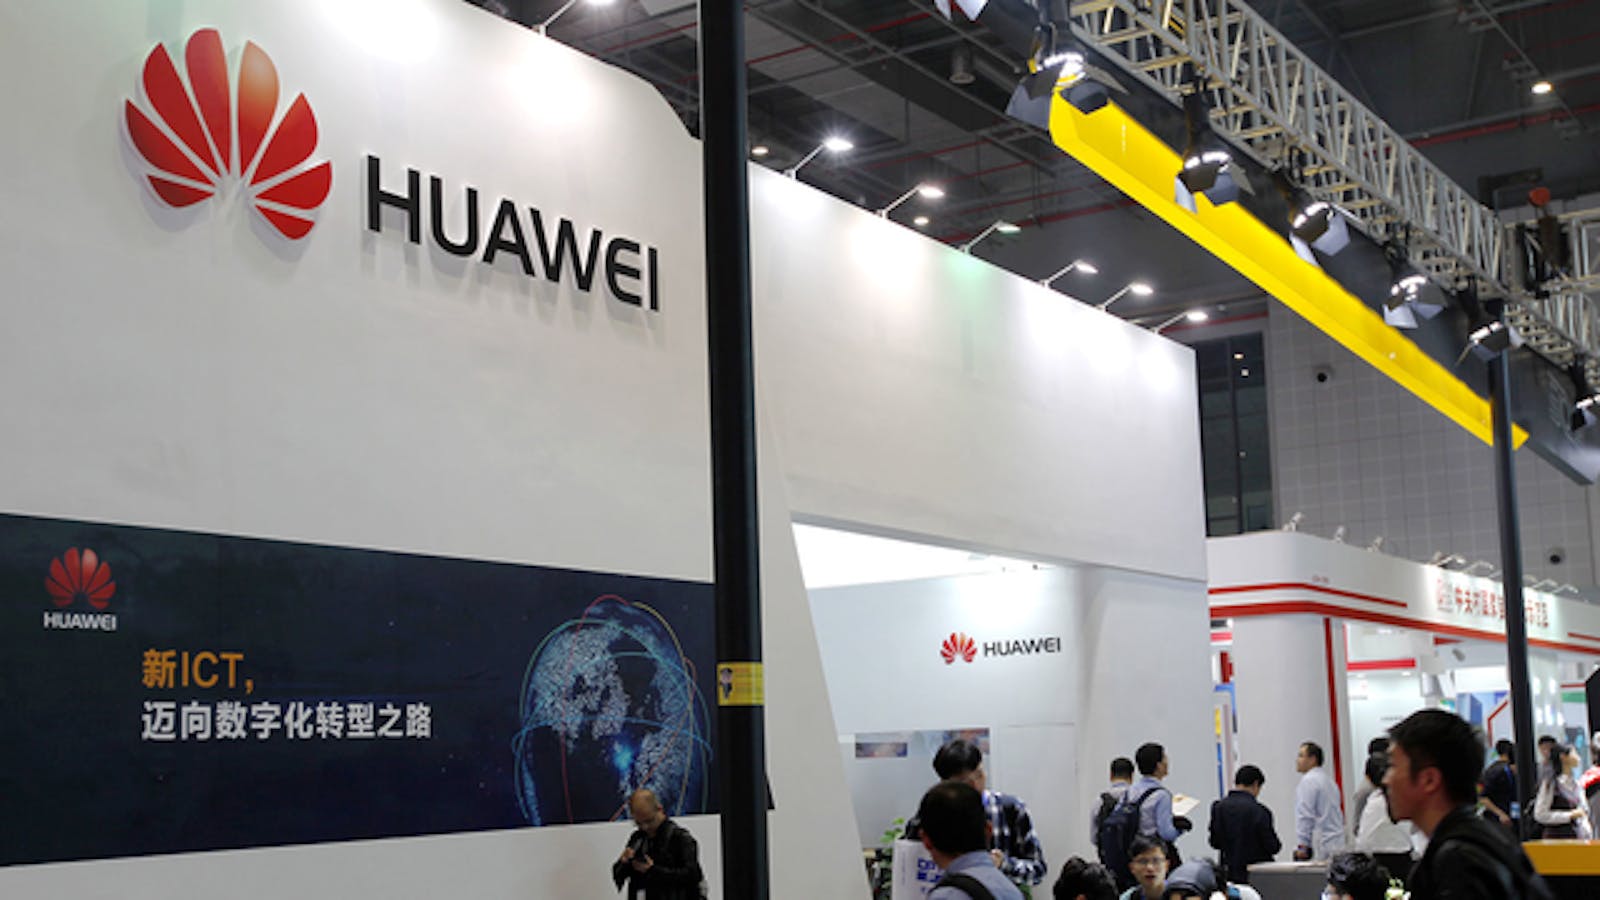 People visit Huawei's stand during an exhibition in Shanghai in late November.  Photo by AP